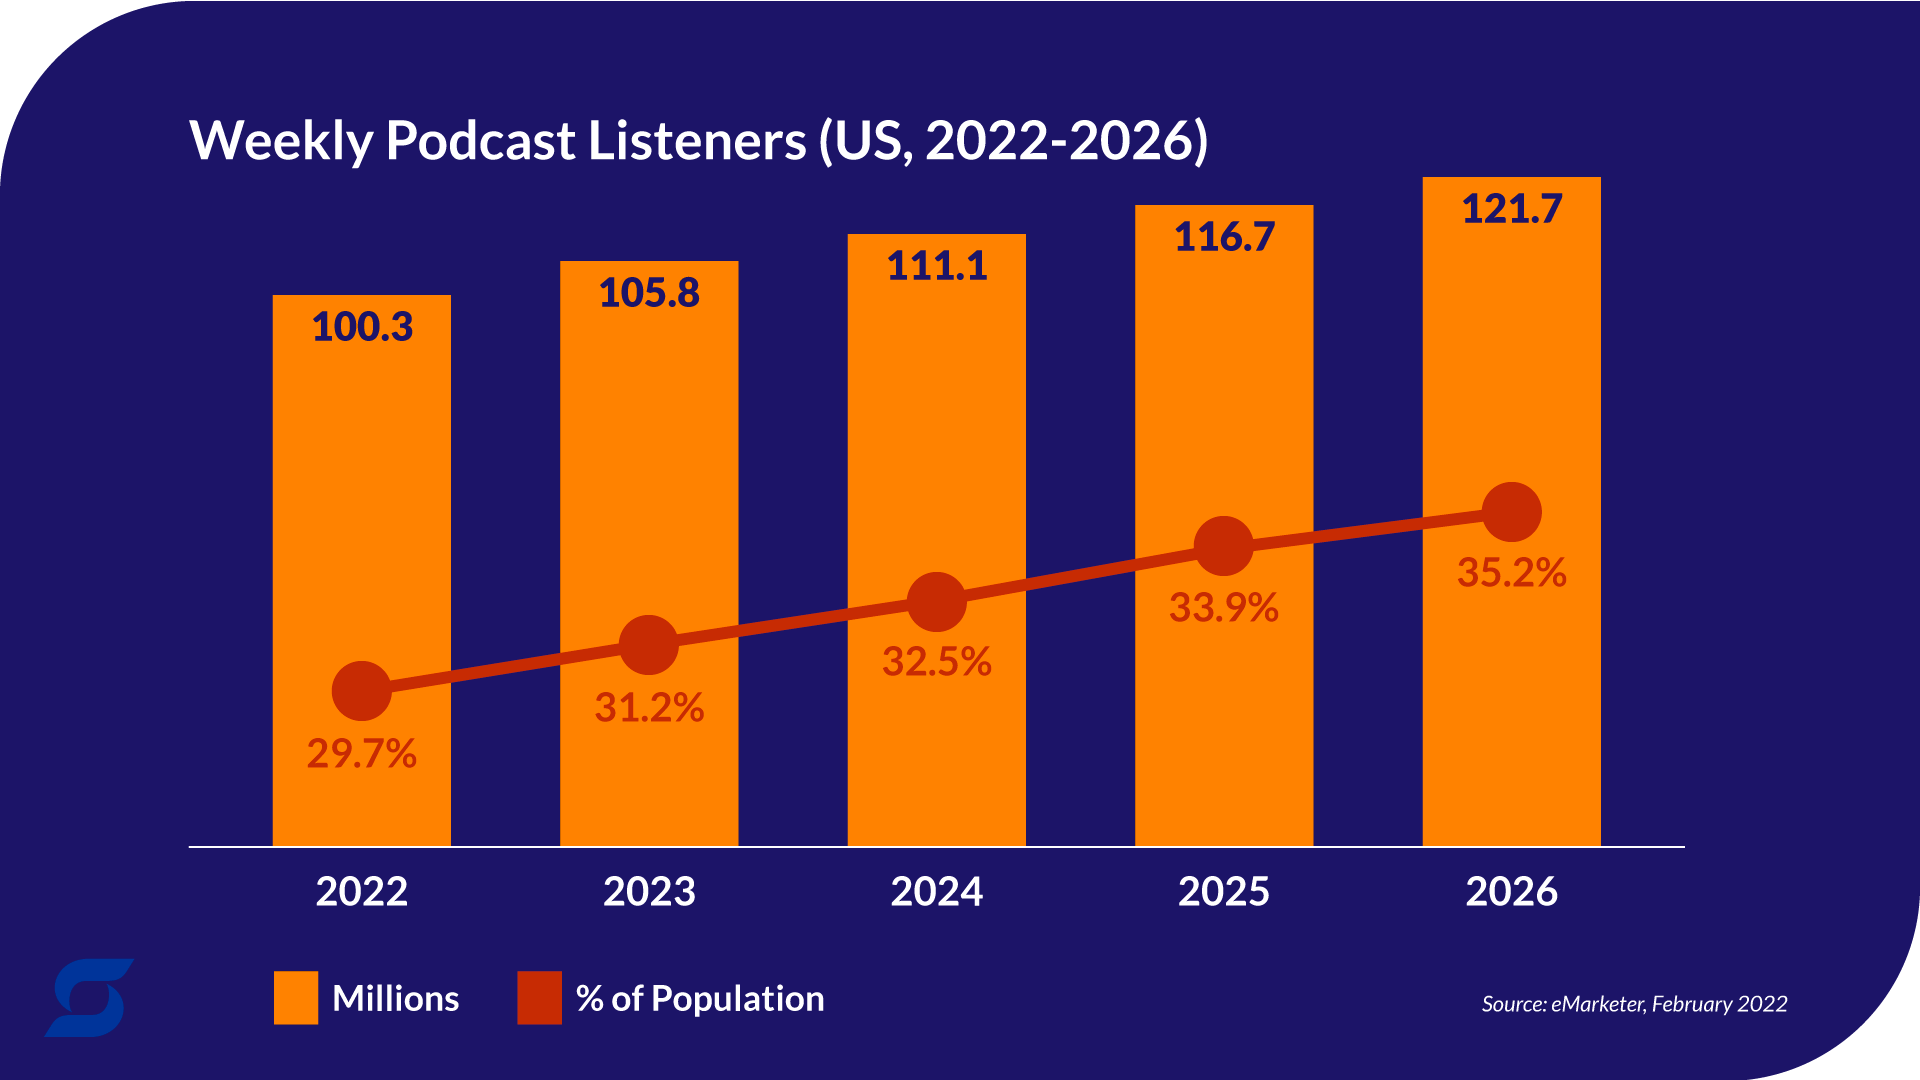 a chart that shows weekly podcast listeners in the U.S. from 2022